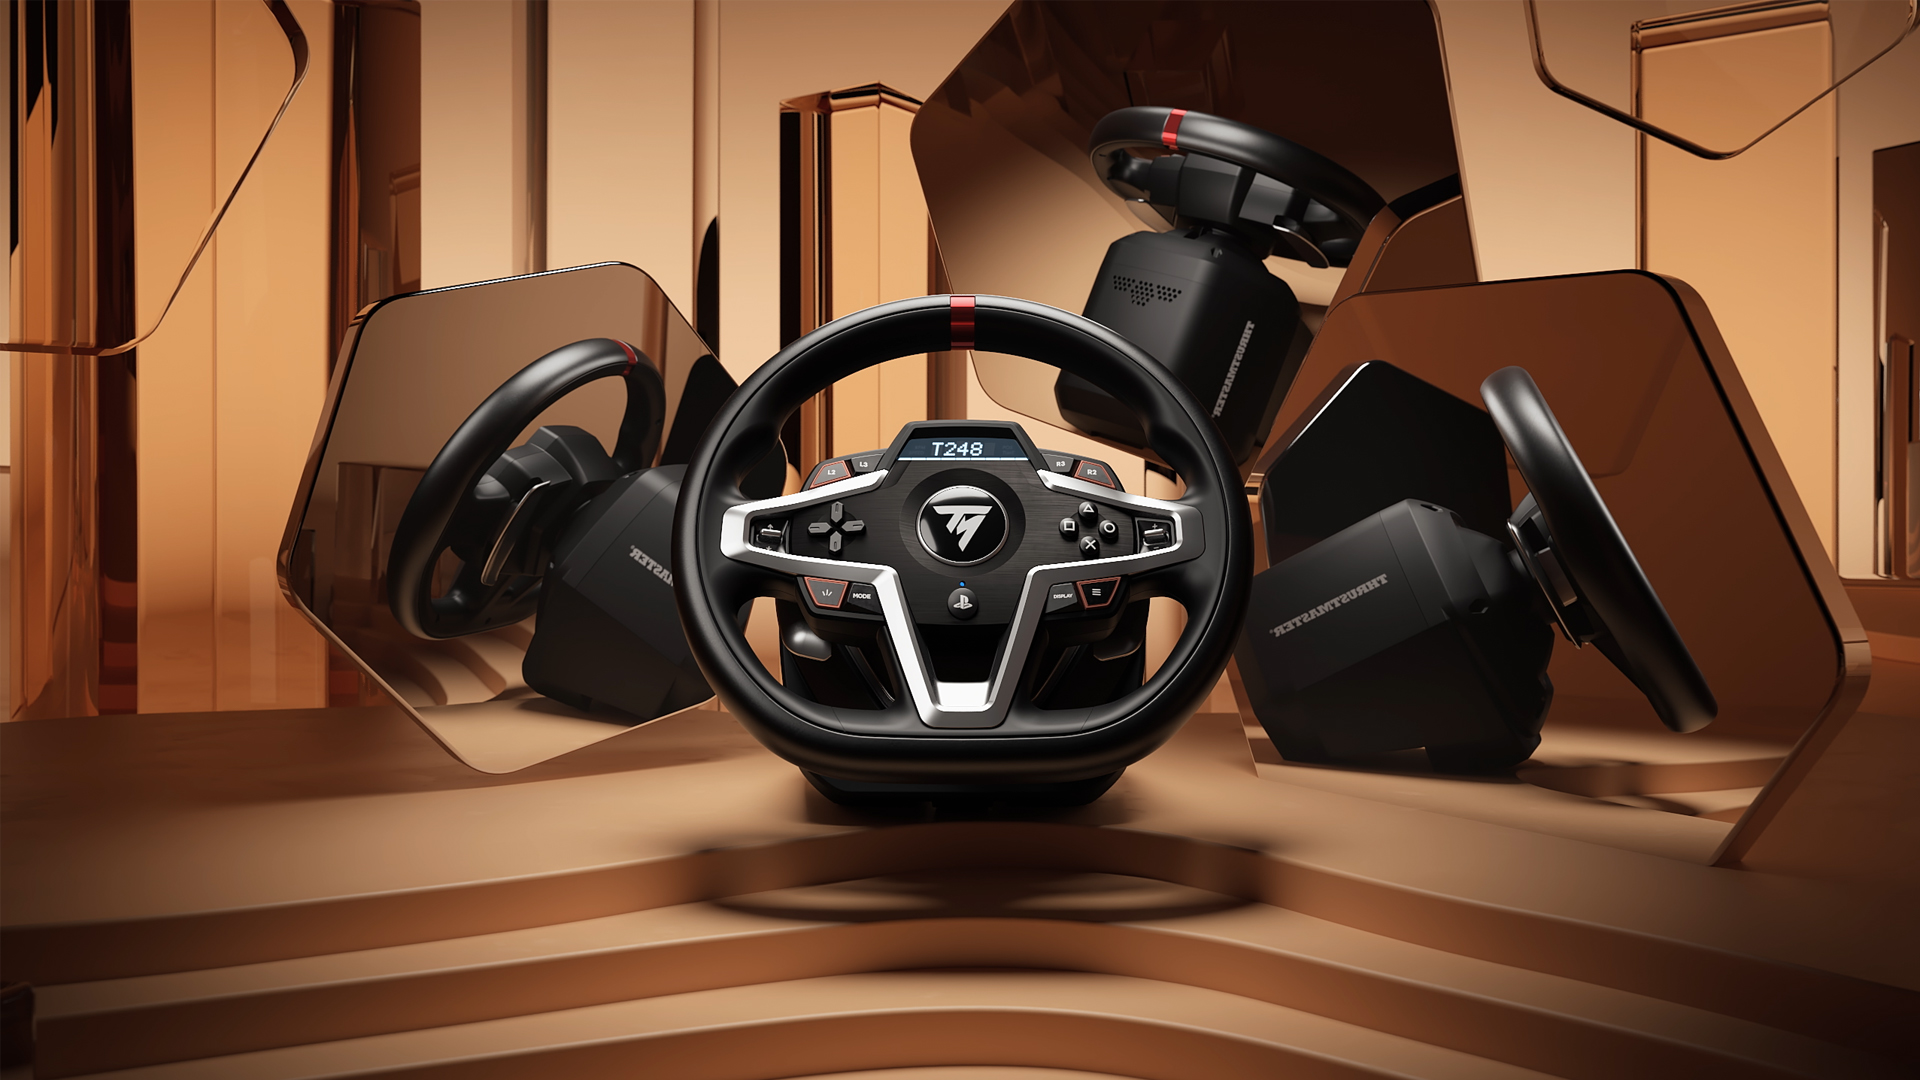 Thrustmaster T248 Racing Wheel review -- Winning the checkered flag